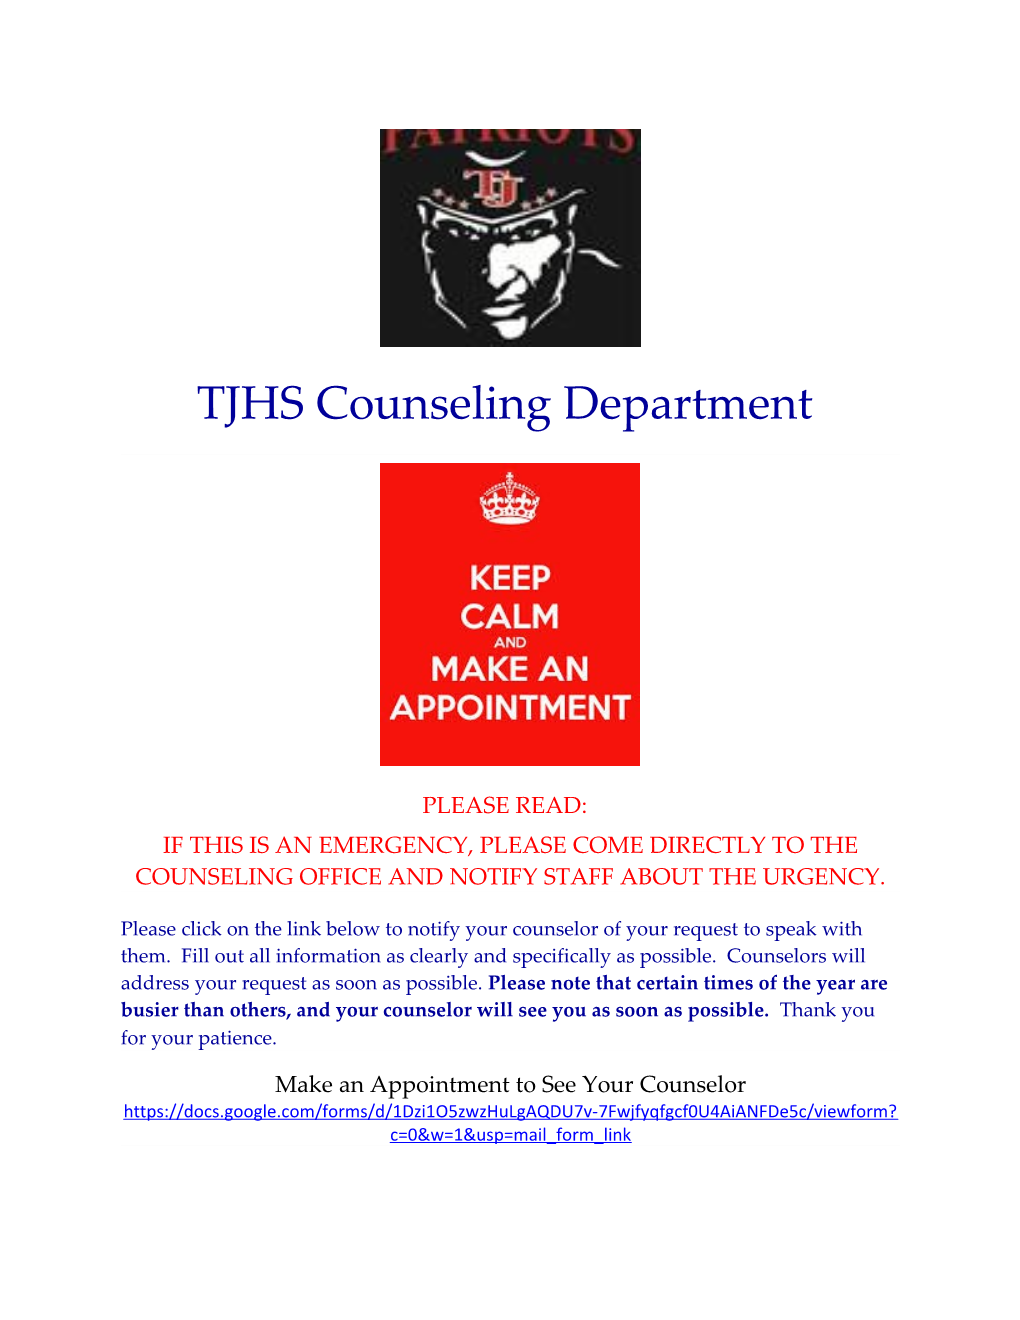 TJHS Counseling Department